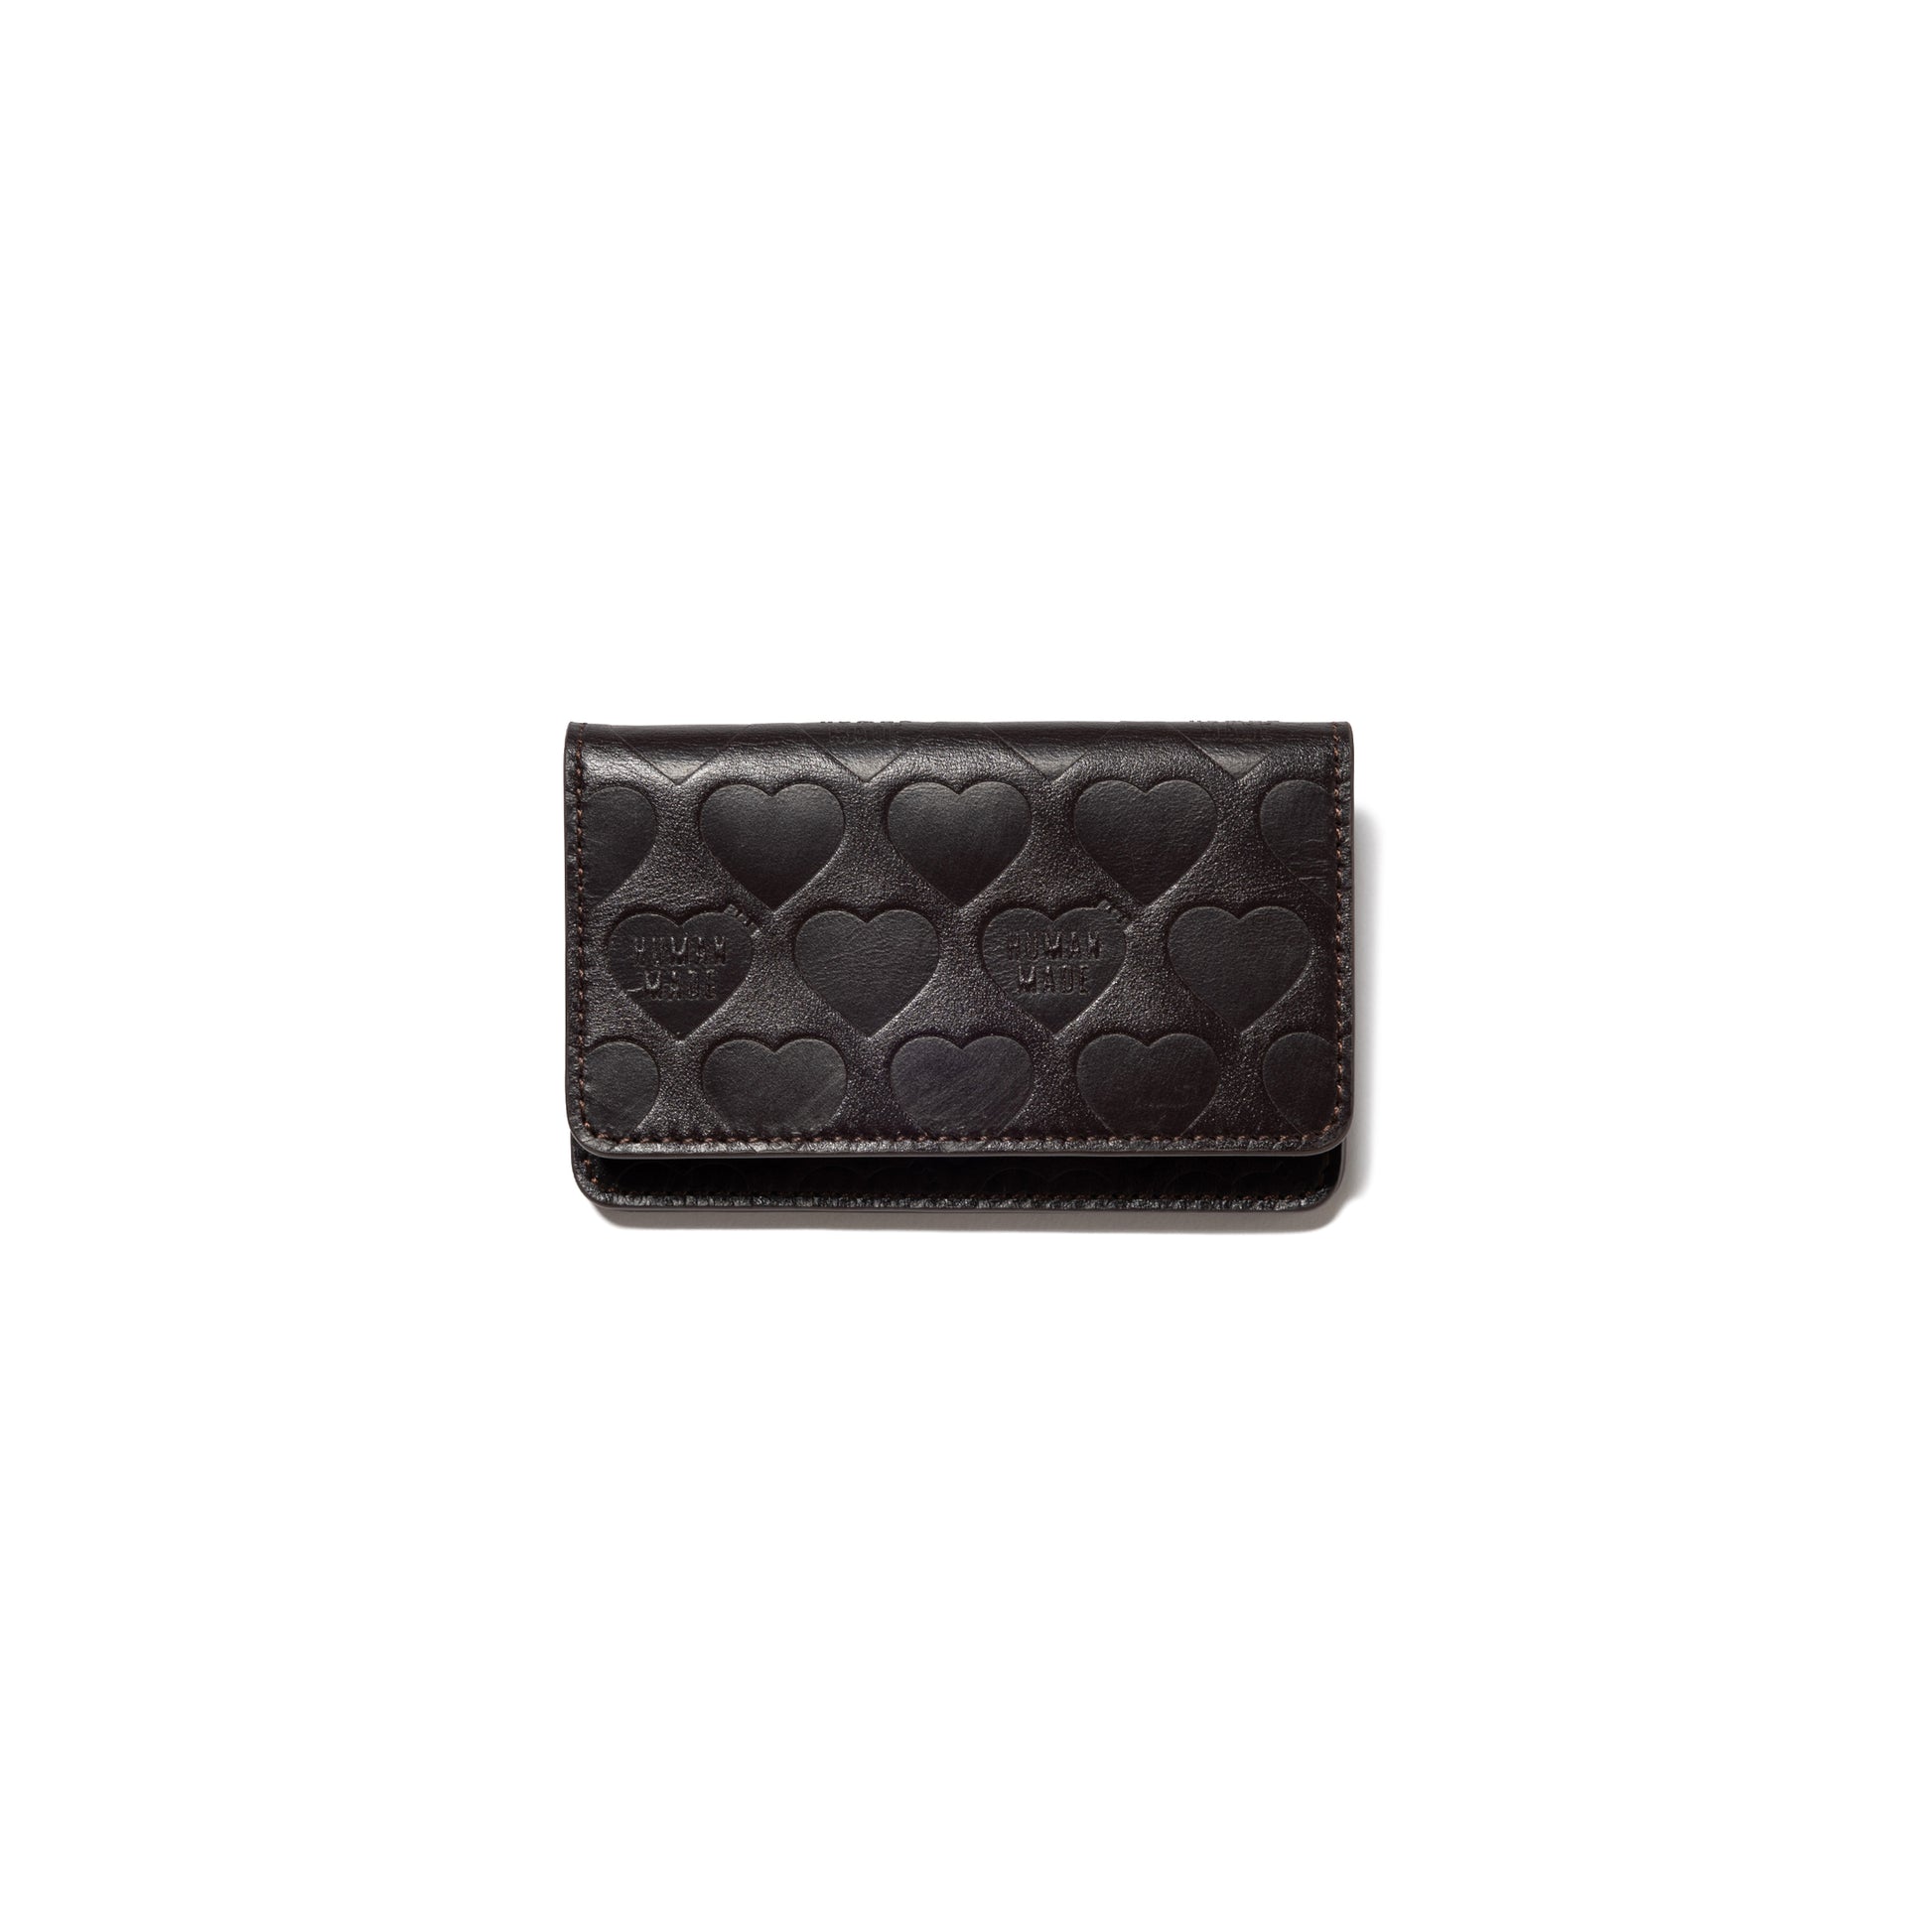 HUMAN MADE LEATHER CARD CASE BW-A